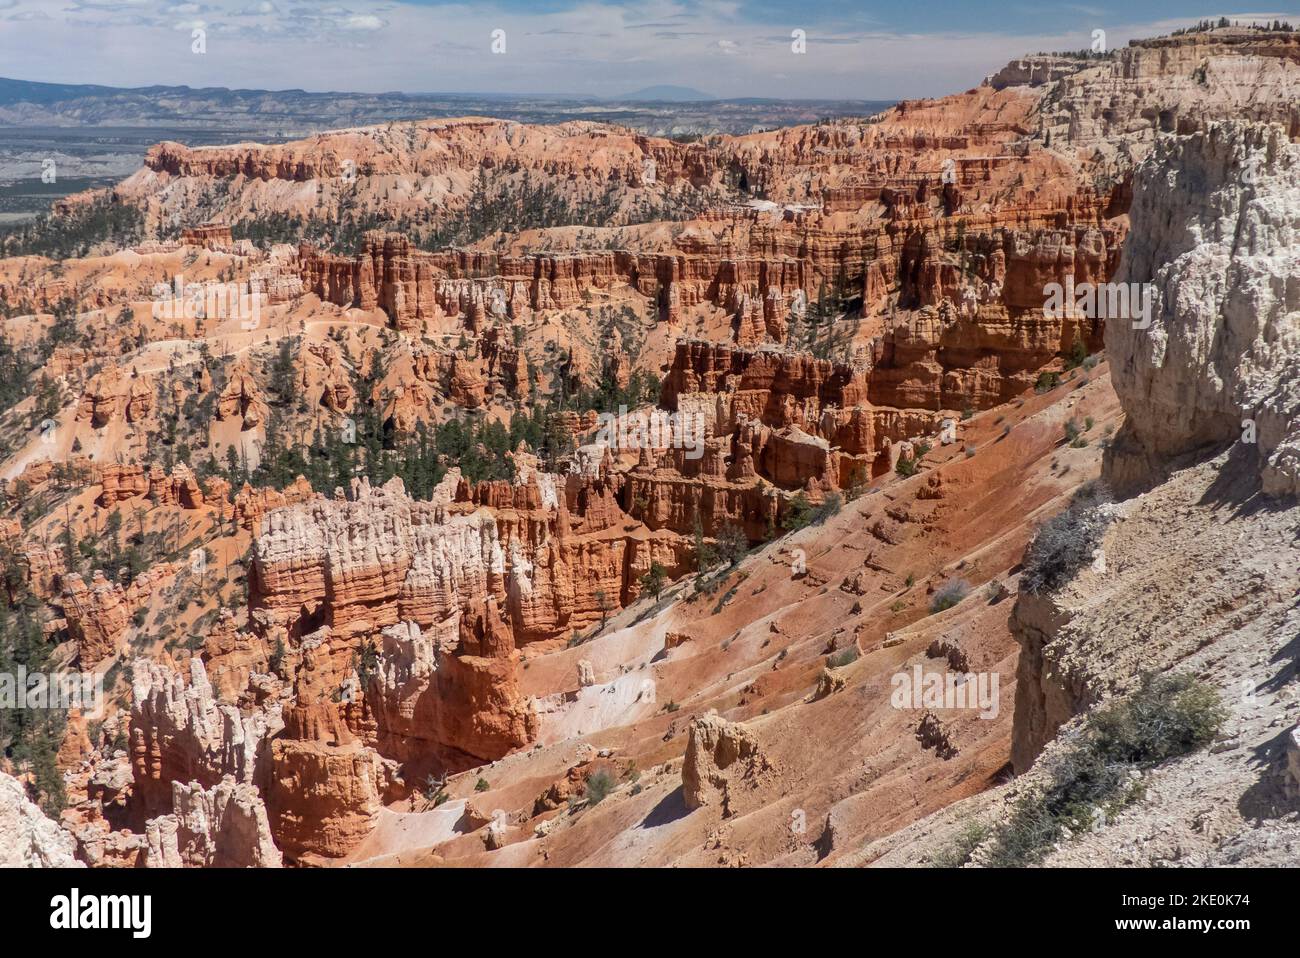 Bryce Canyon NP in Utah: the canyon from the Rim Trail between Inspiration Point and Sunset Point. Stock Photo